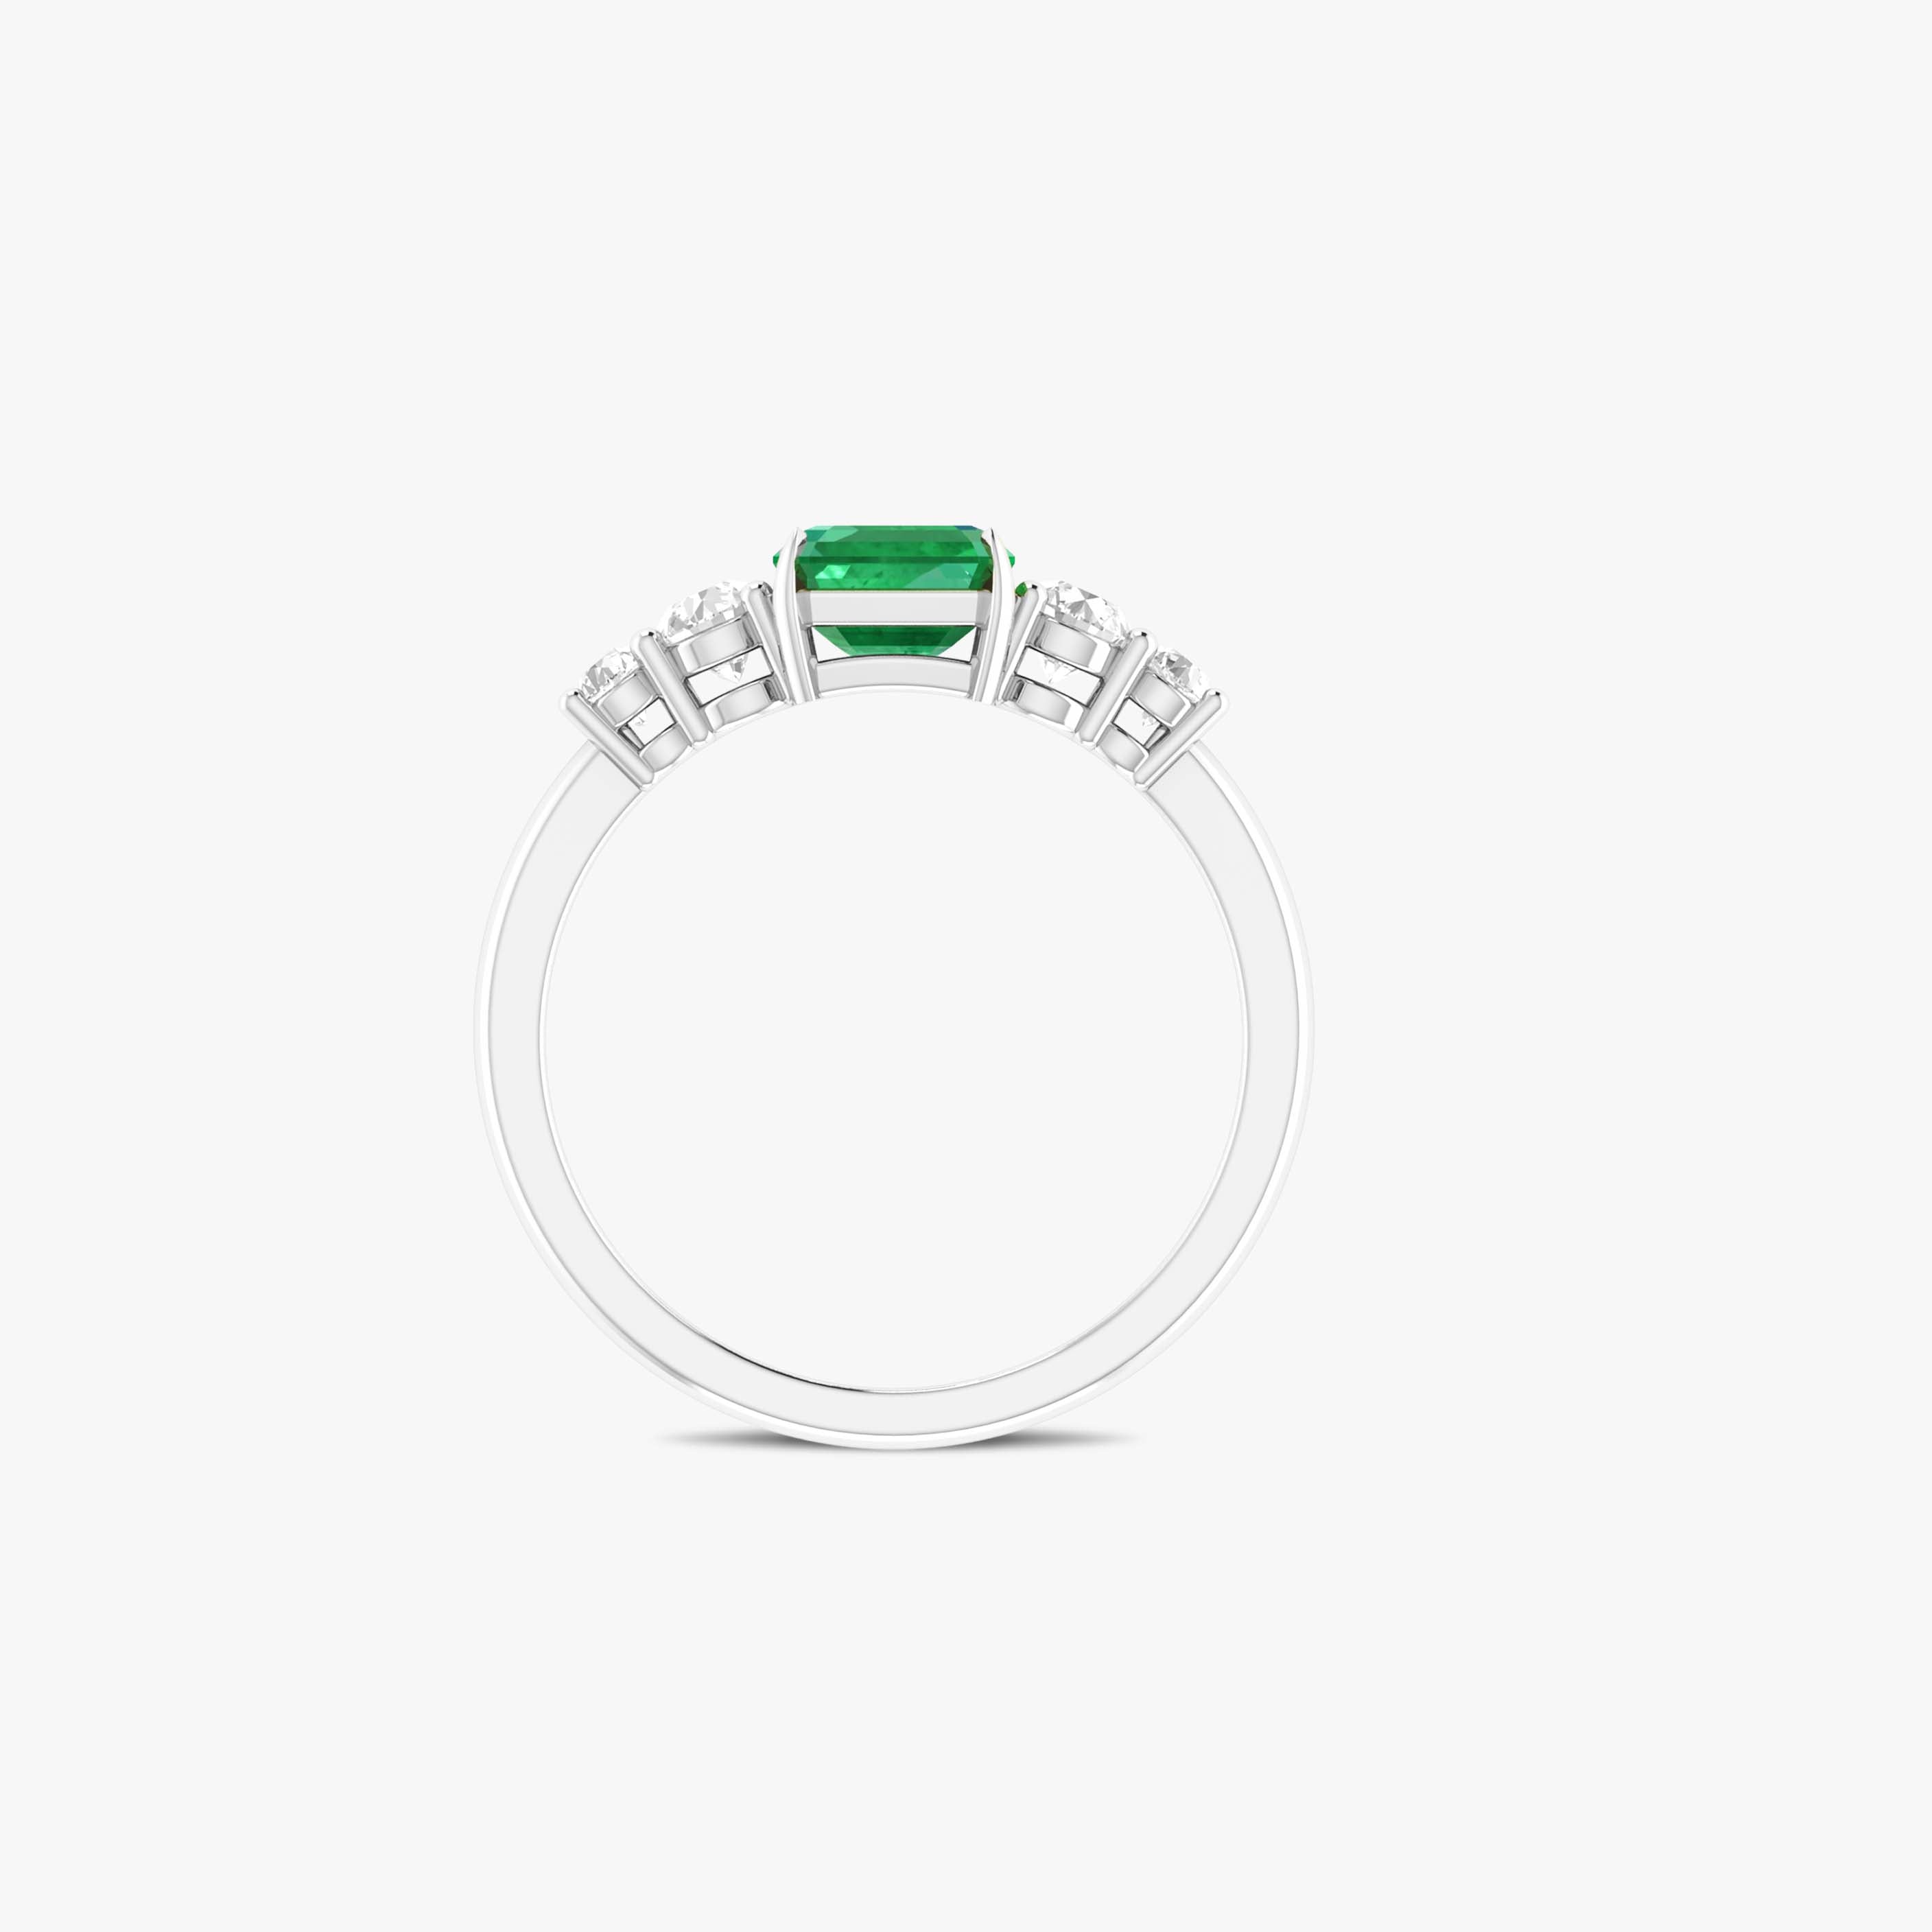 Green Emerald Faceted Octagon Gemstone Ring